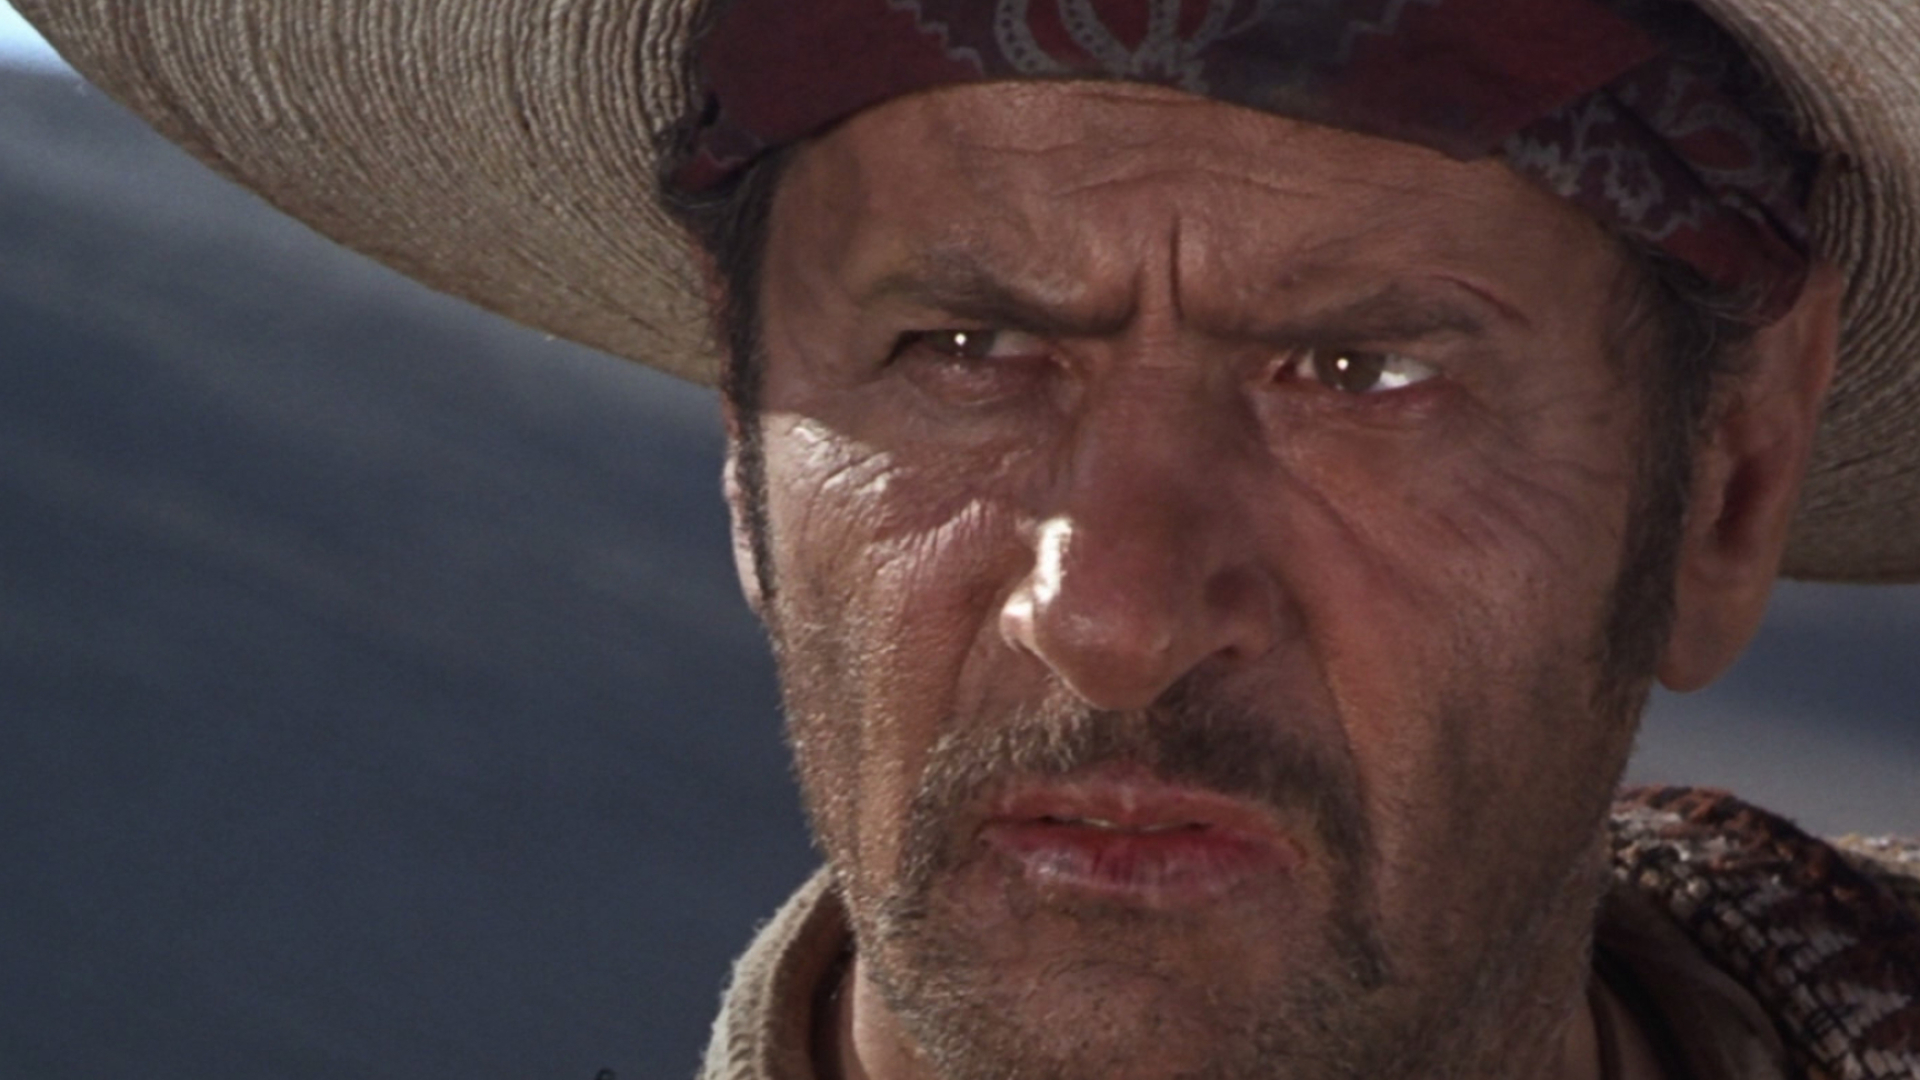 The Good, The Bad And The Ugly, Western movie, Sergio Leone masterpiece, Clint Eastwood, 1920x1080 Full HD Desktop